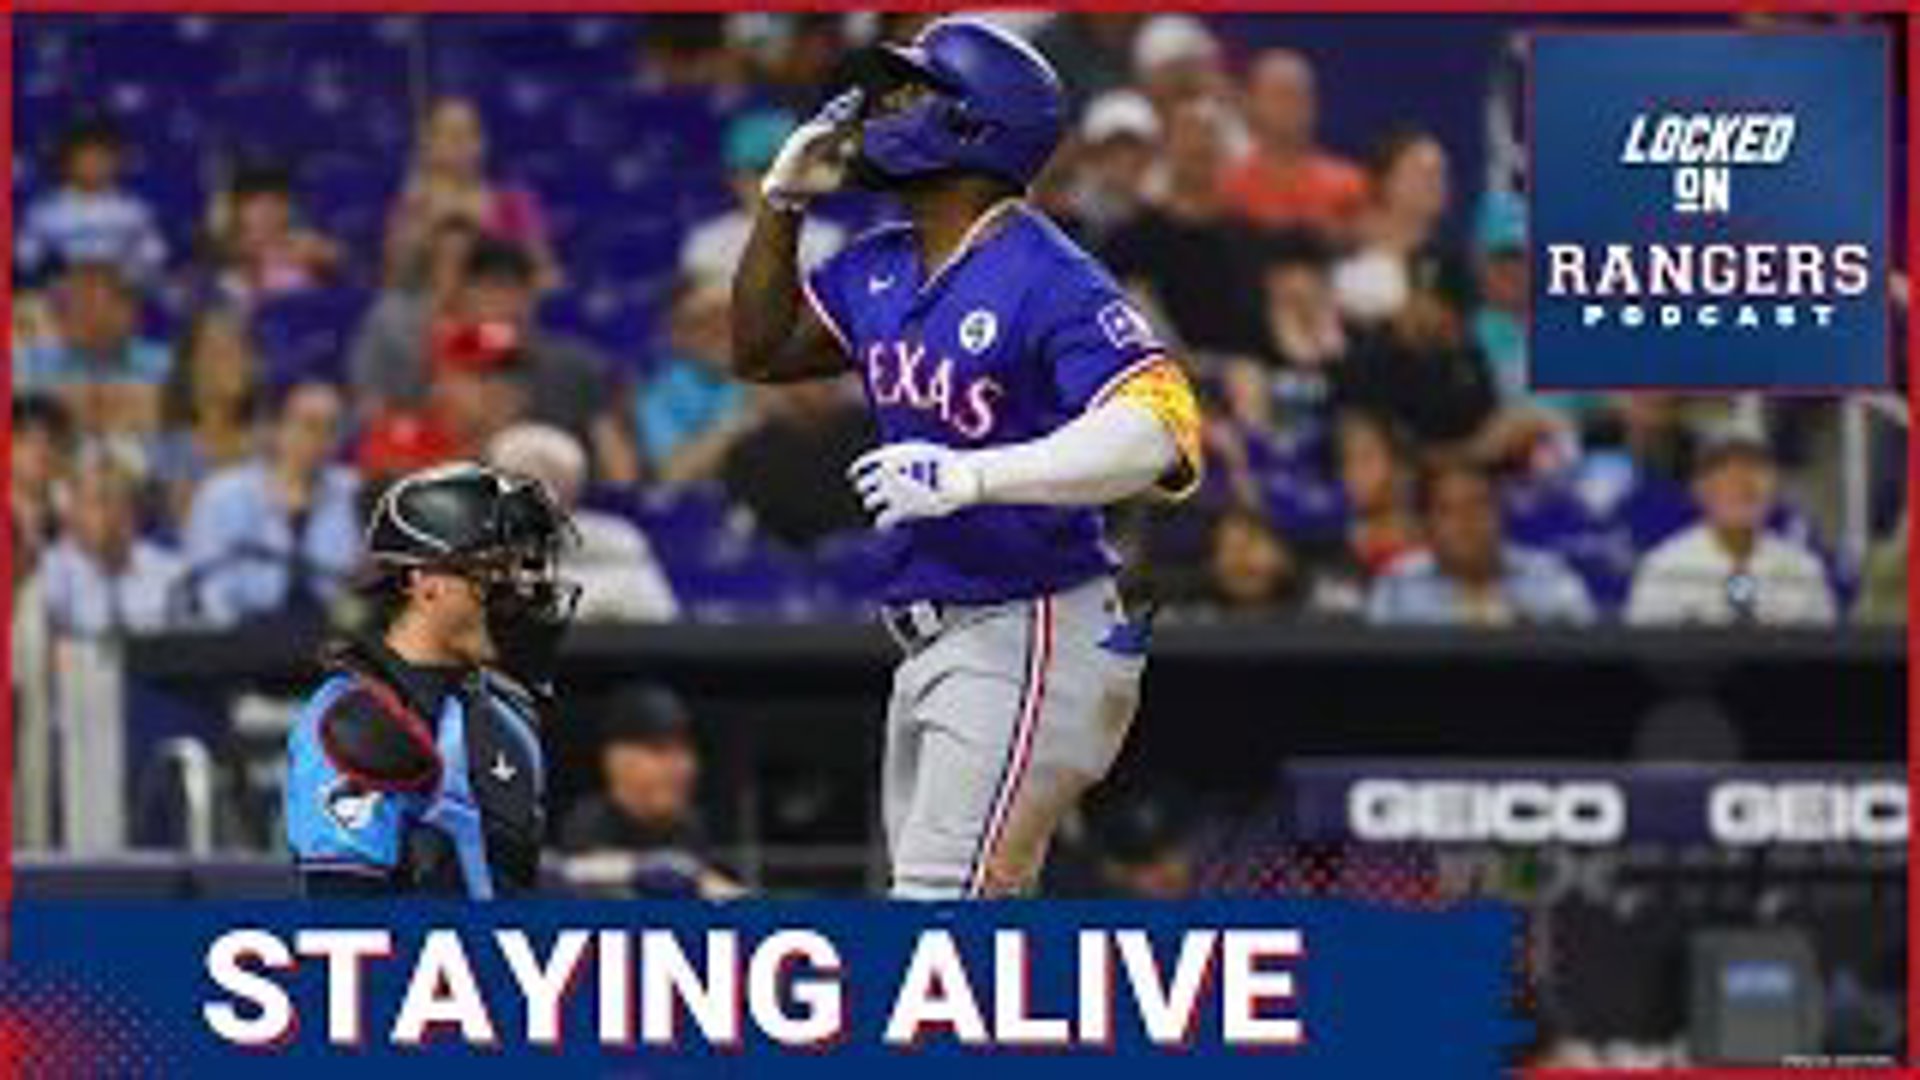 The Texas Rangers struggled to hit lefties early on this season, but with some key lineup changes the offense showed up big against the Marlins.